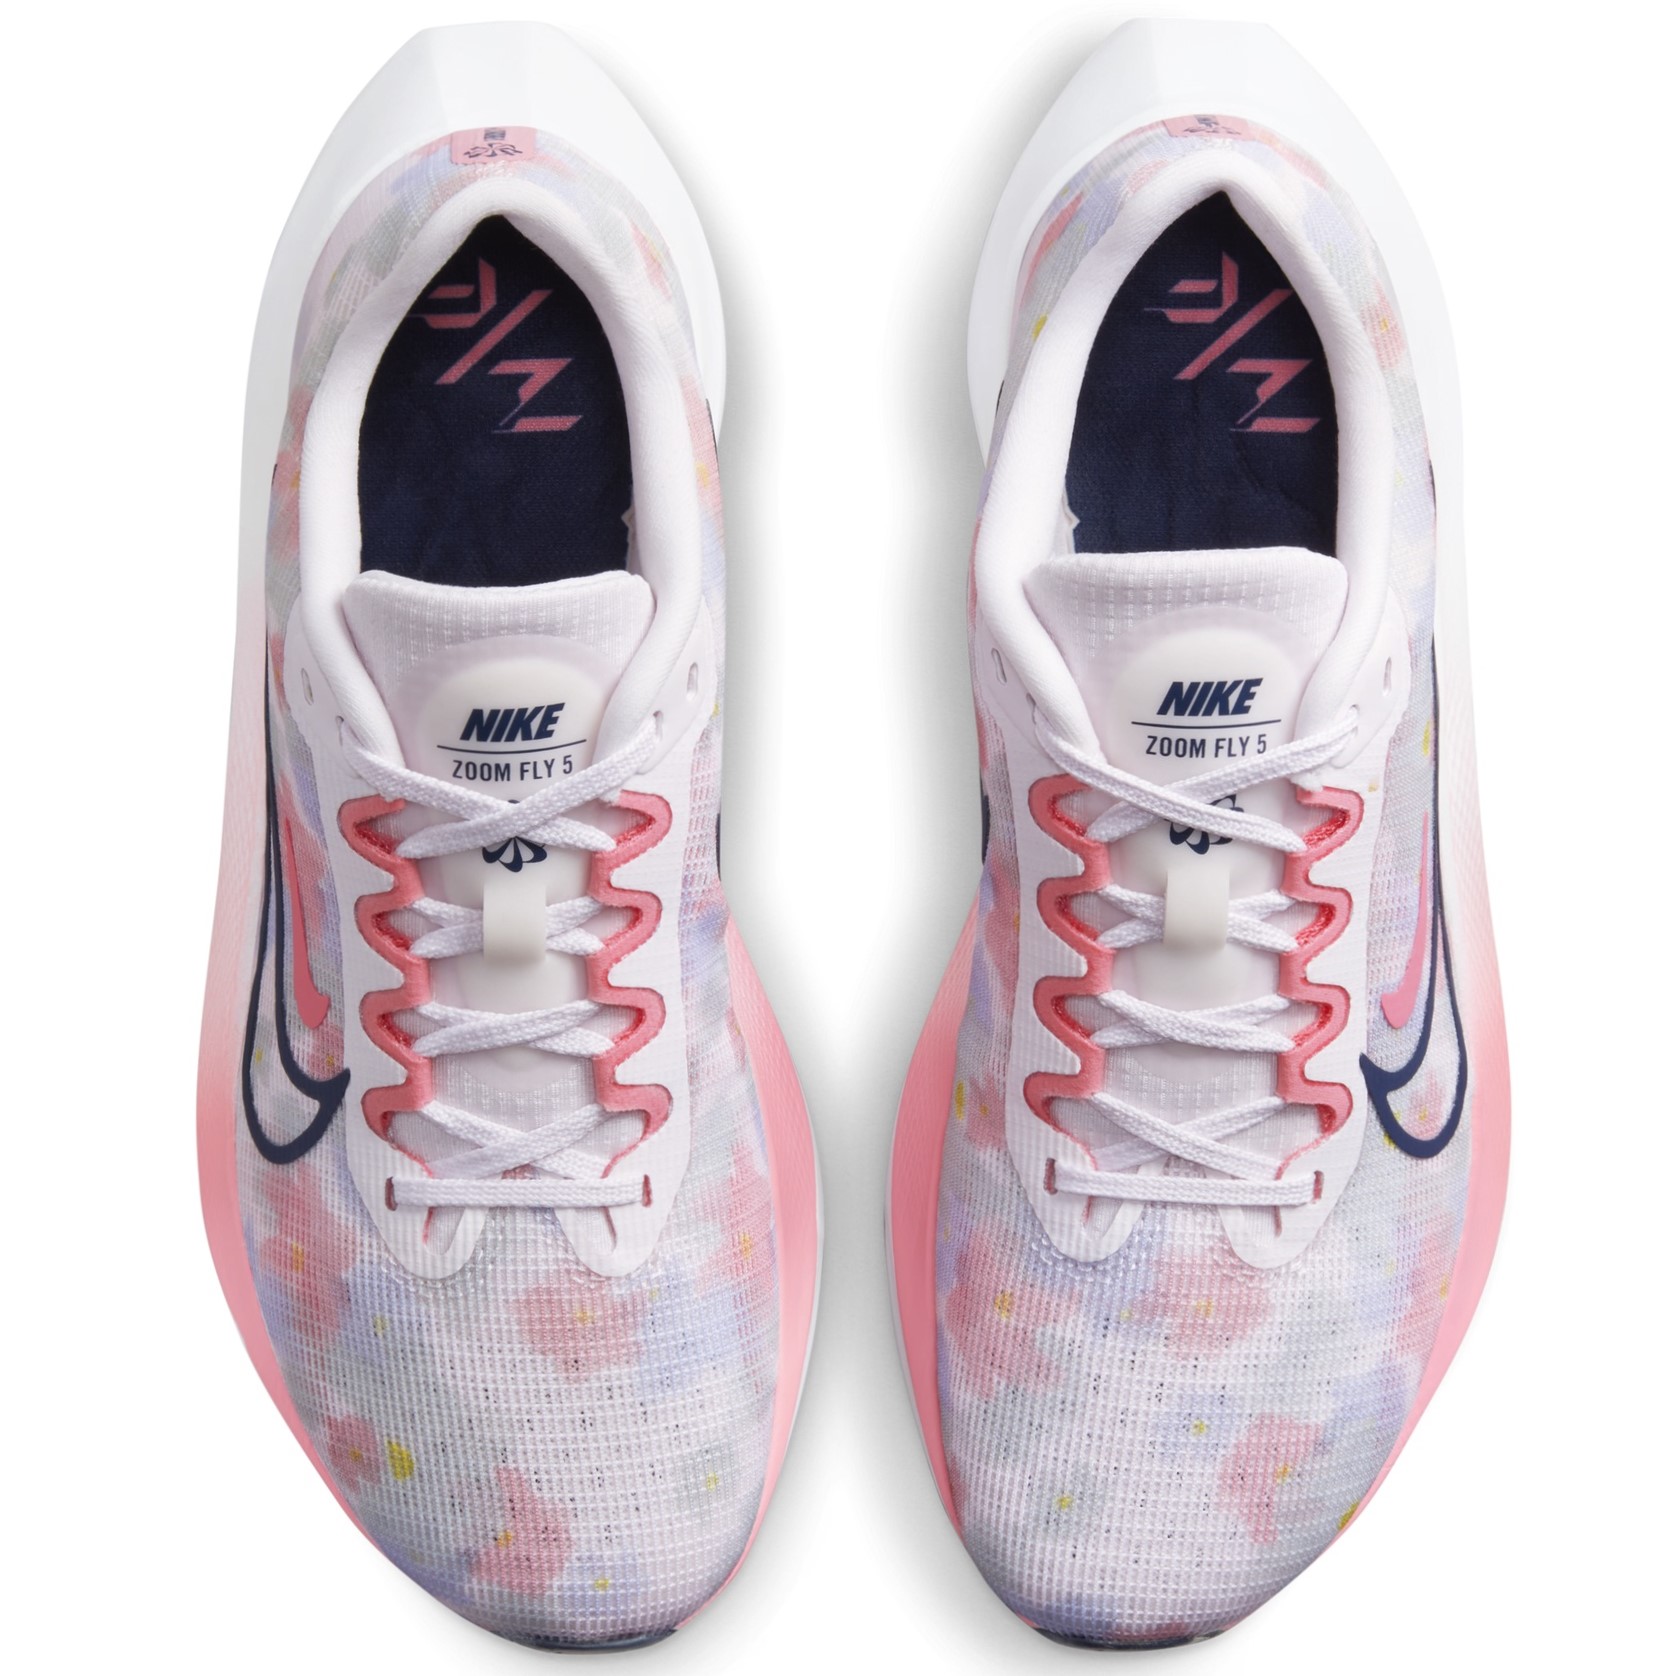 GIÀY NIKE NỮ ZOOM FLY 5 PREMIUM WOMEN ROAD RUNNING SHOES PEARL PINK DV7894-600 1